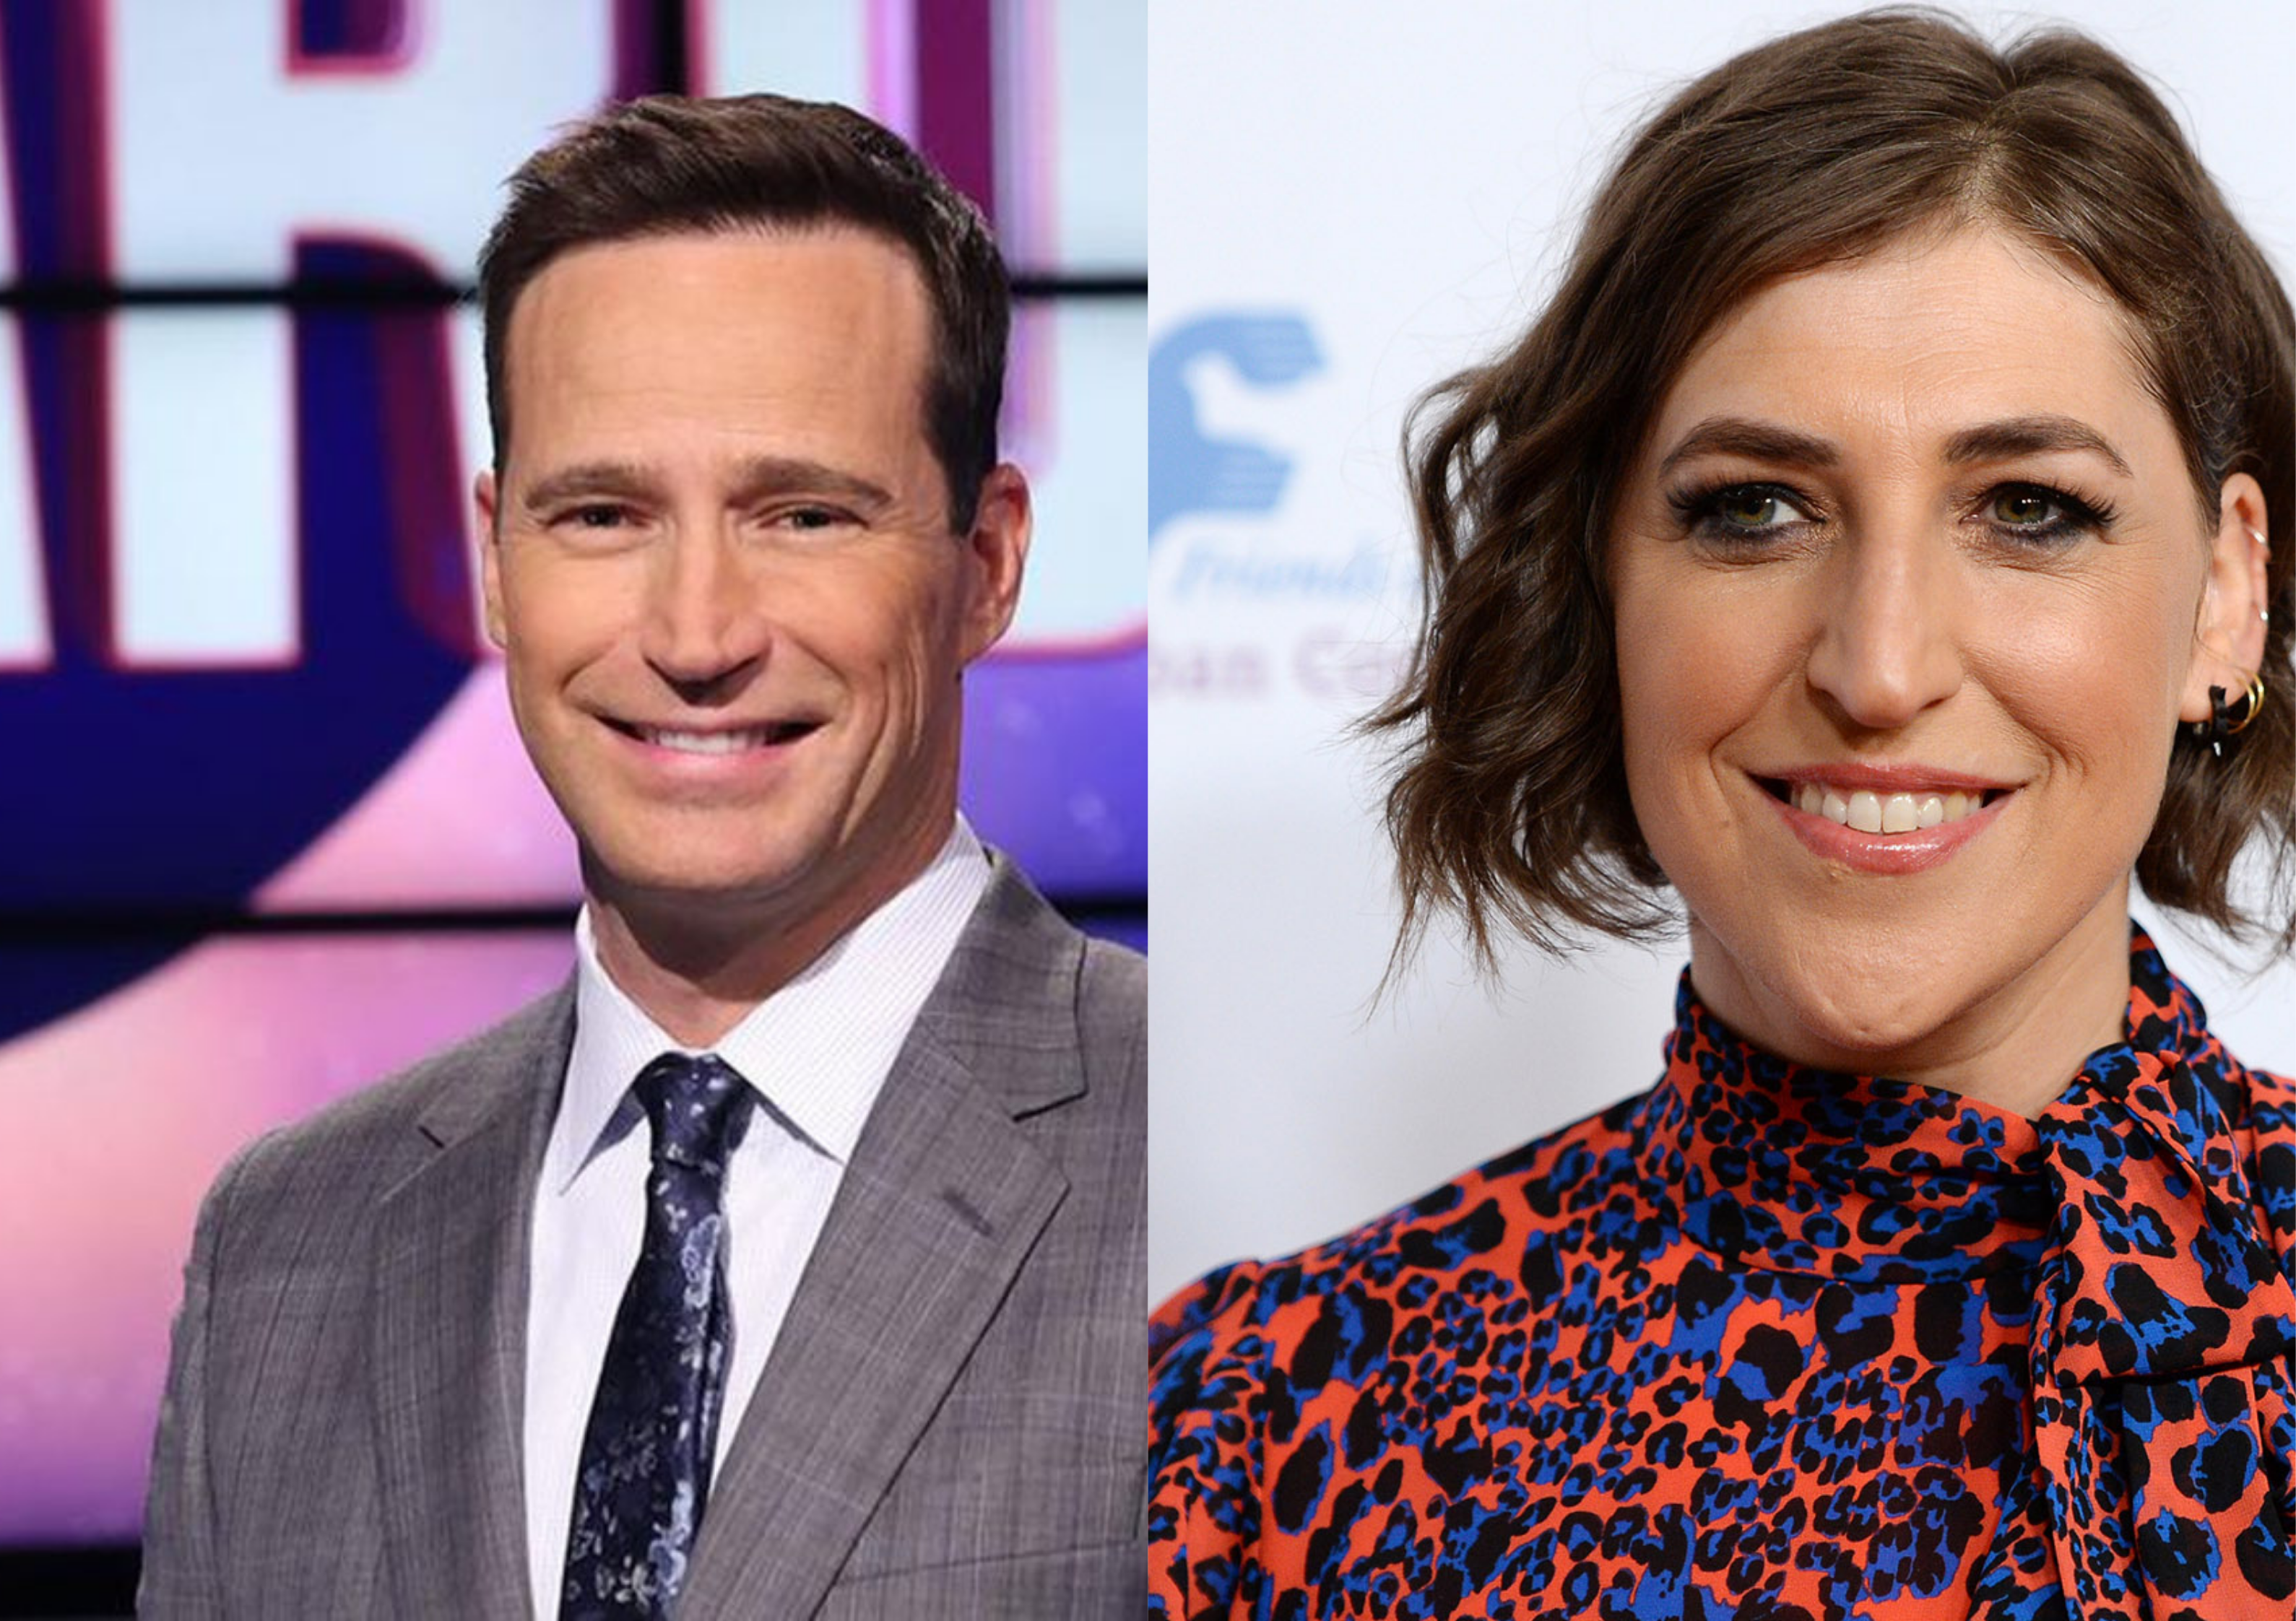 Mike Richards and Mayim Bialik Announced as the New Hosts of 'Jeopardy!'